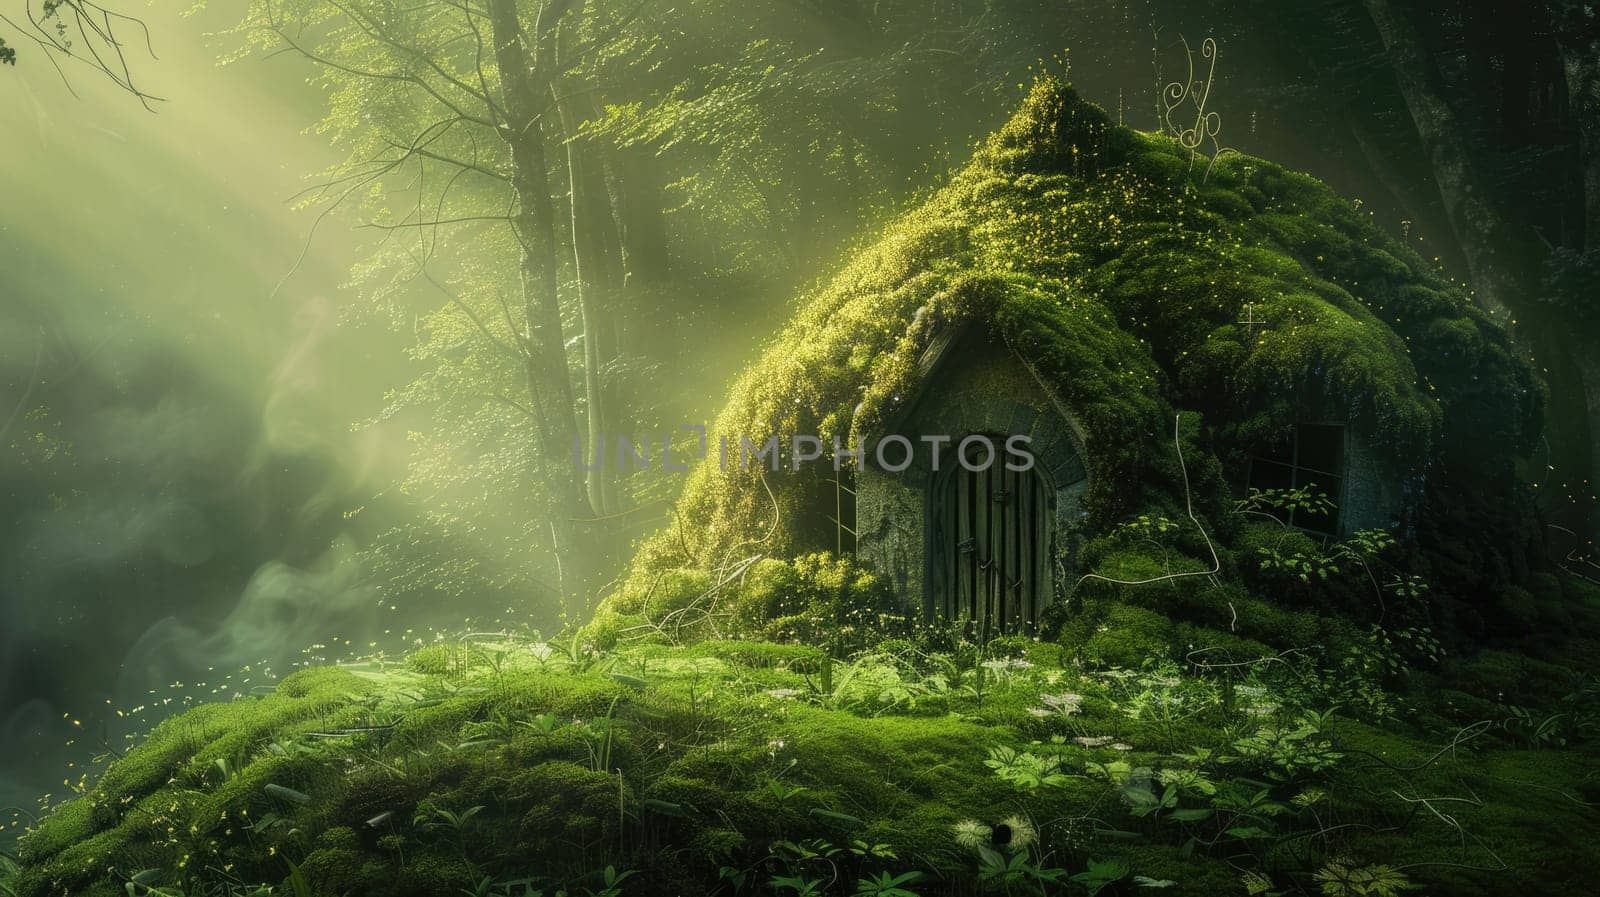 Fantasy hut in greenery hiding in the forest by natali_brill